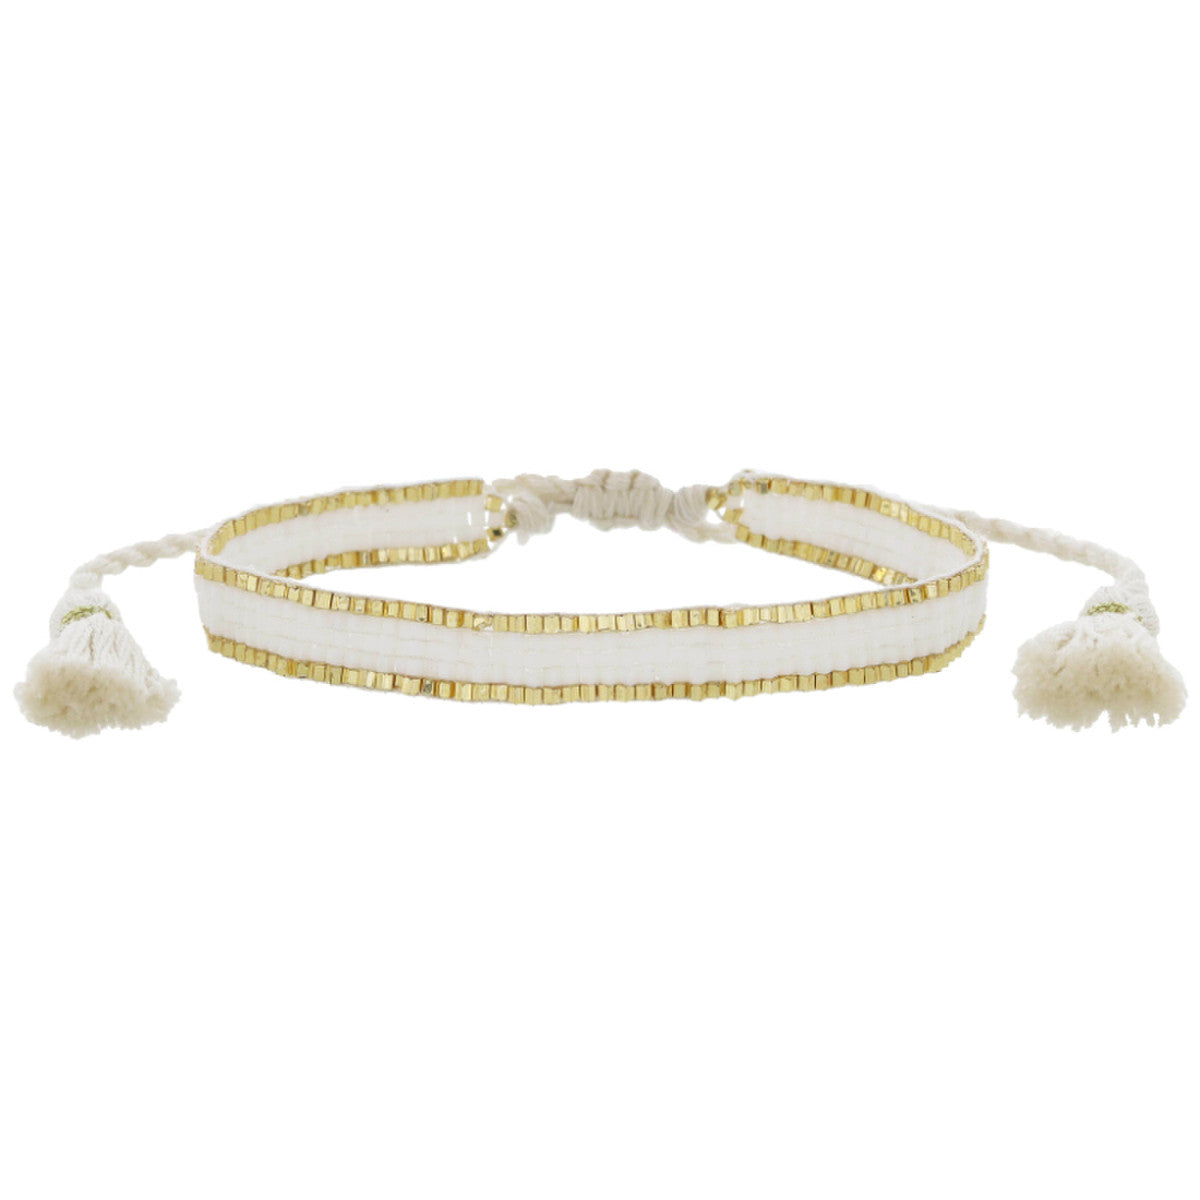 Thin White with Gold Edge Woven Beaded Band Bracelet